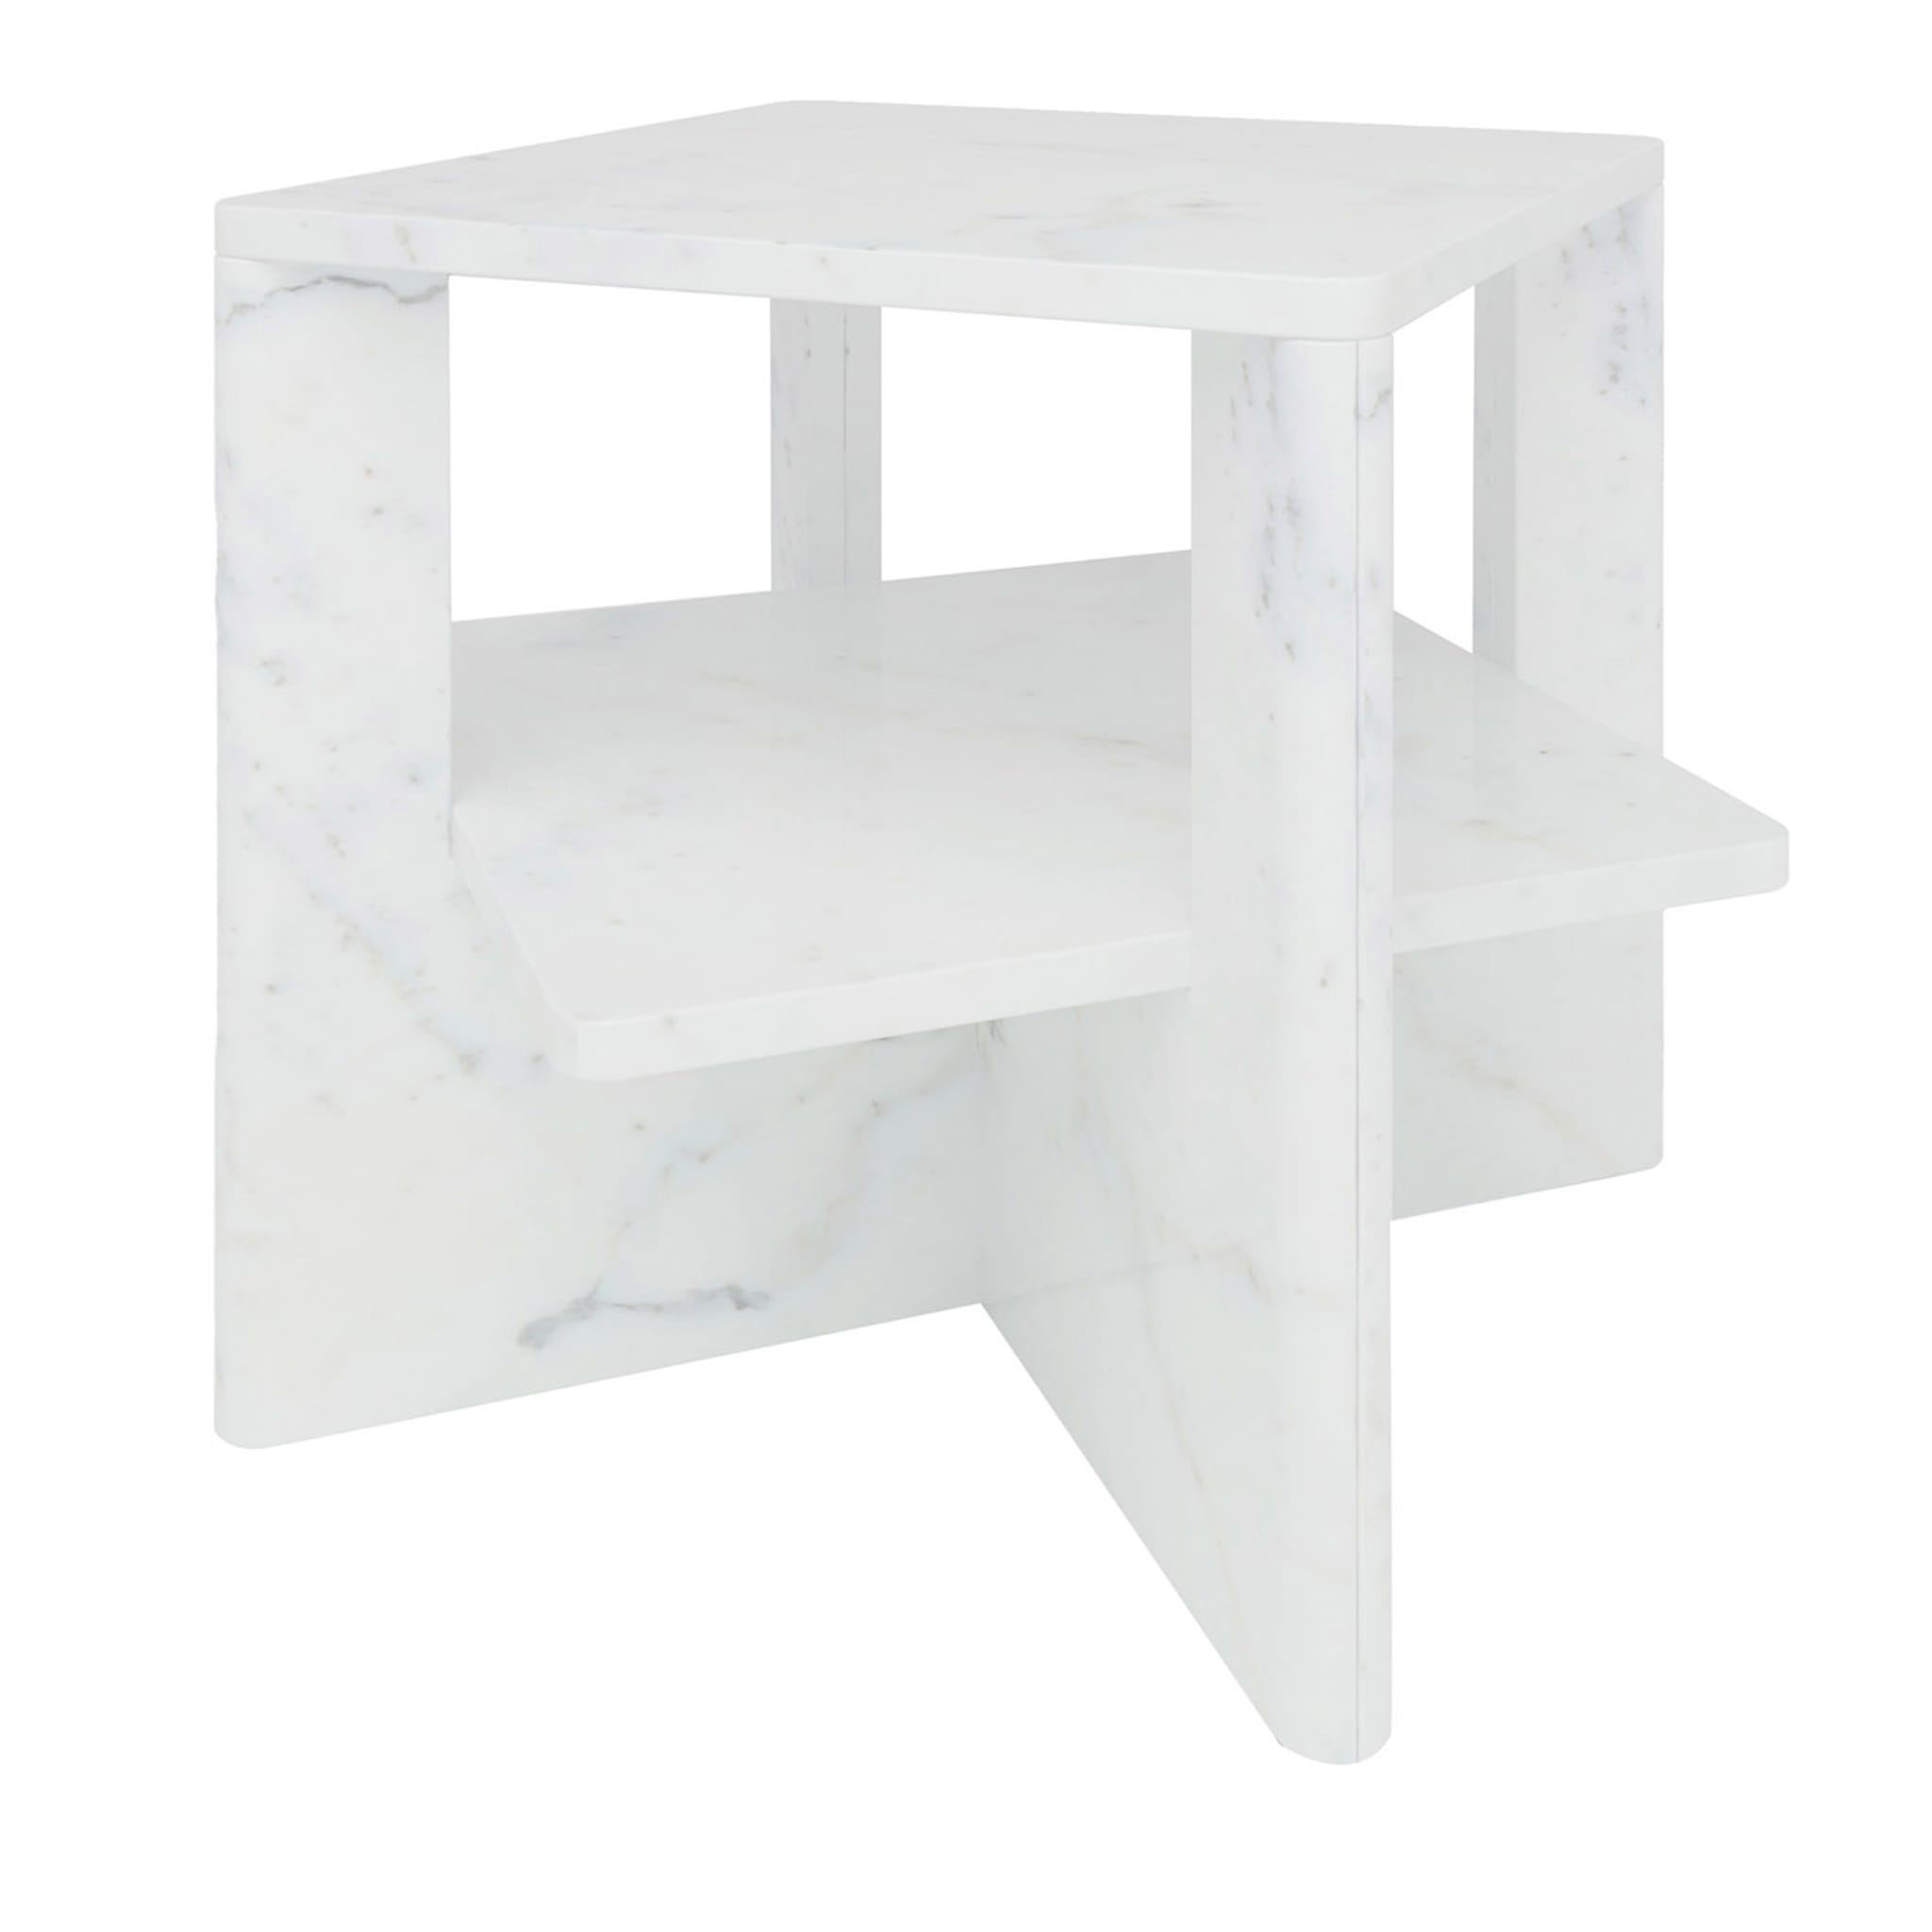 Plus+Double Marble Coffee Table #6 - Main view